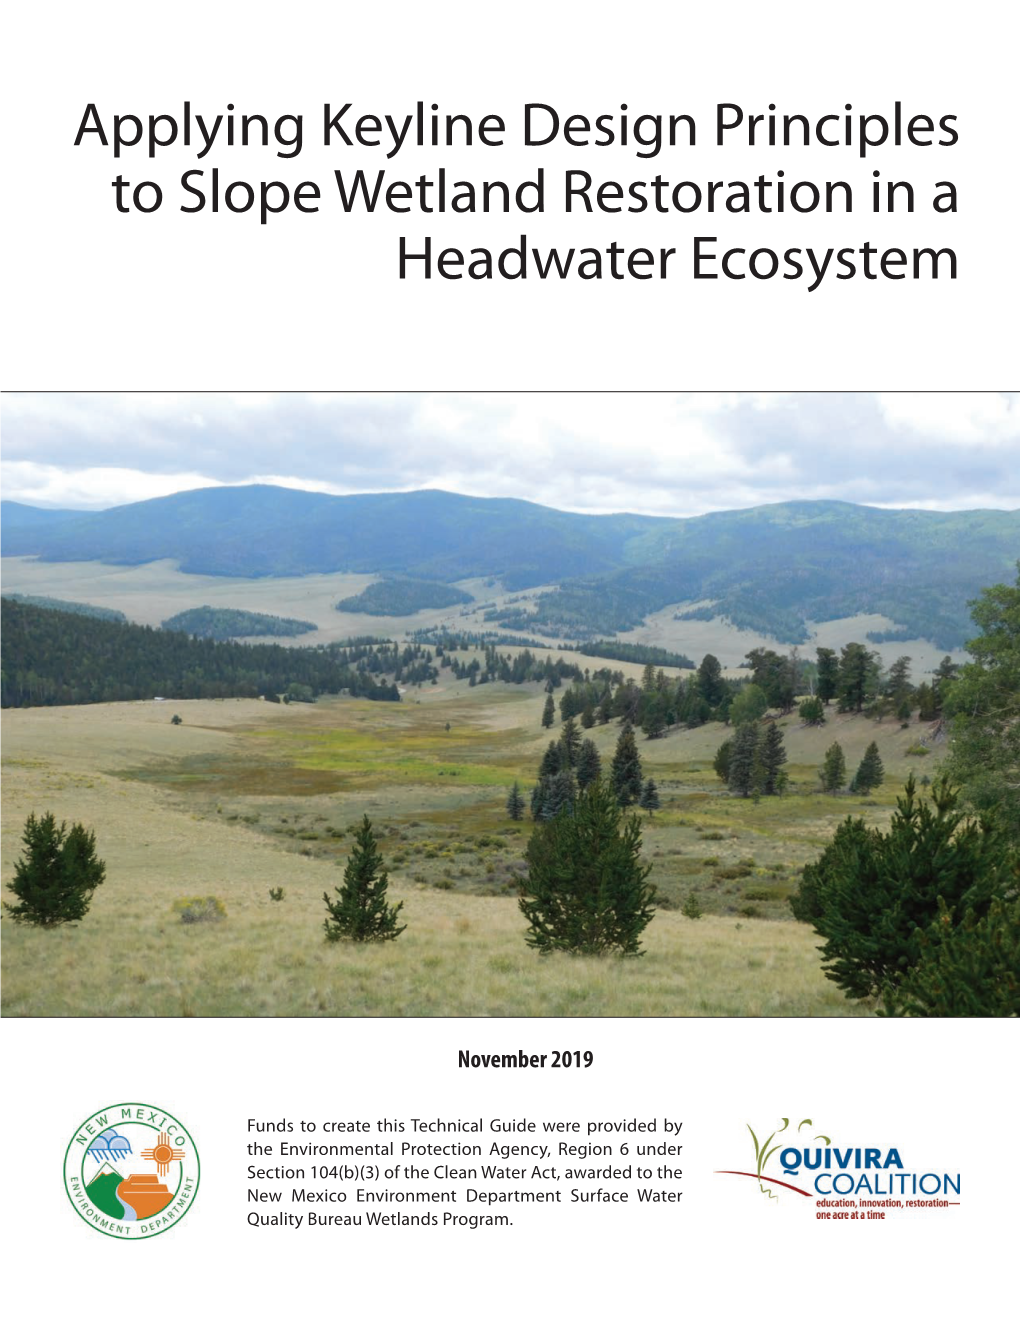 Applying Keyline Design Principles to Slope Wetland Restoration in a Headwater Ecosystem